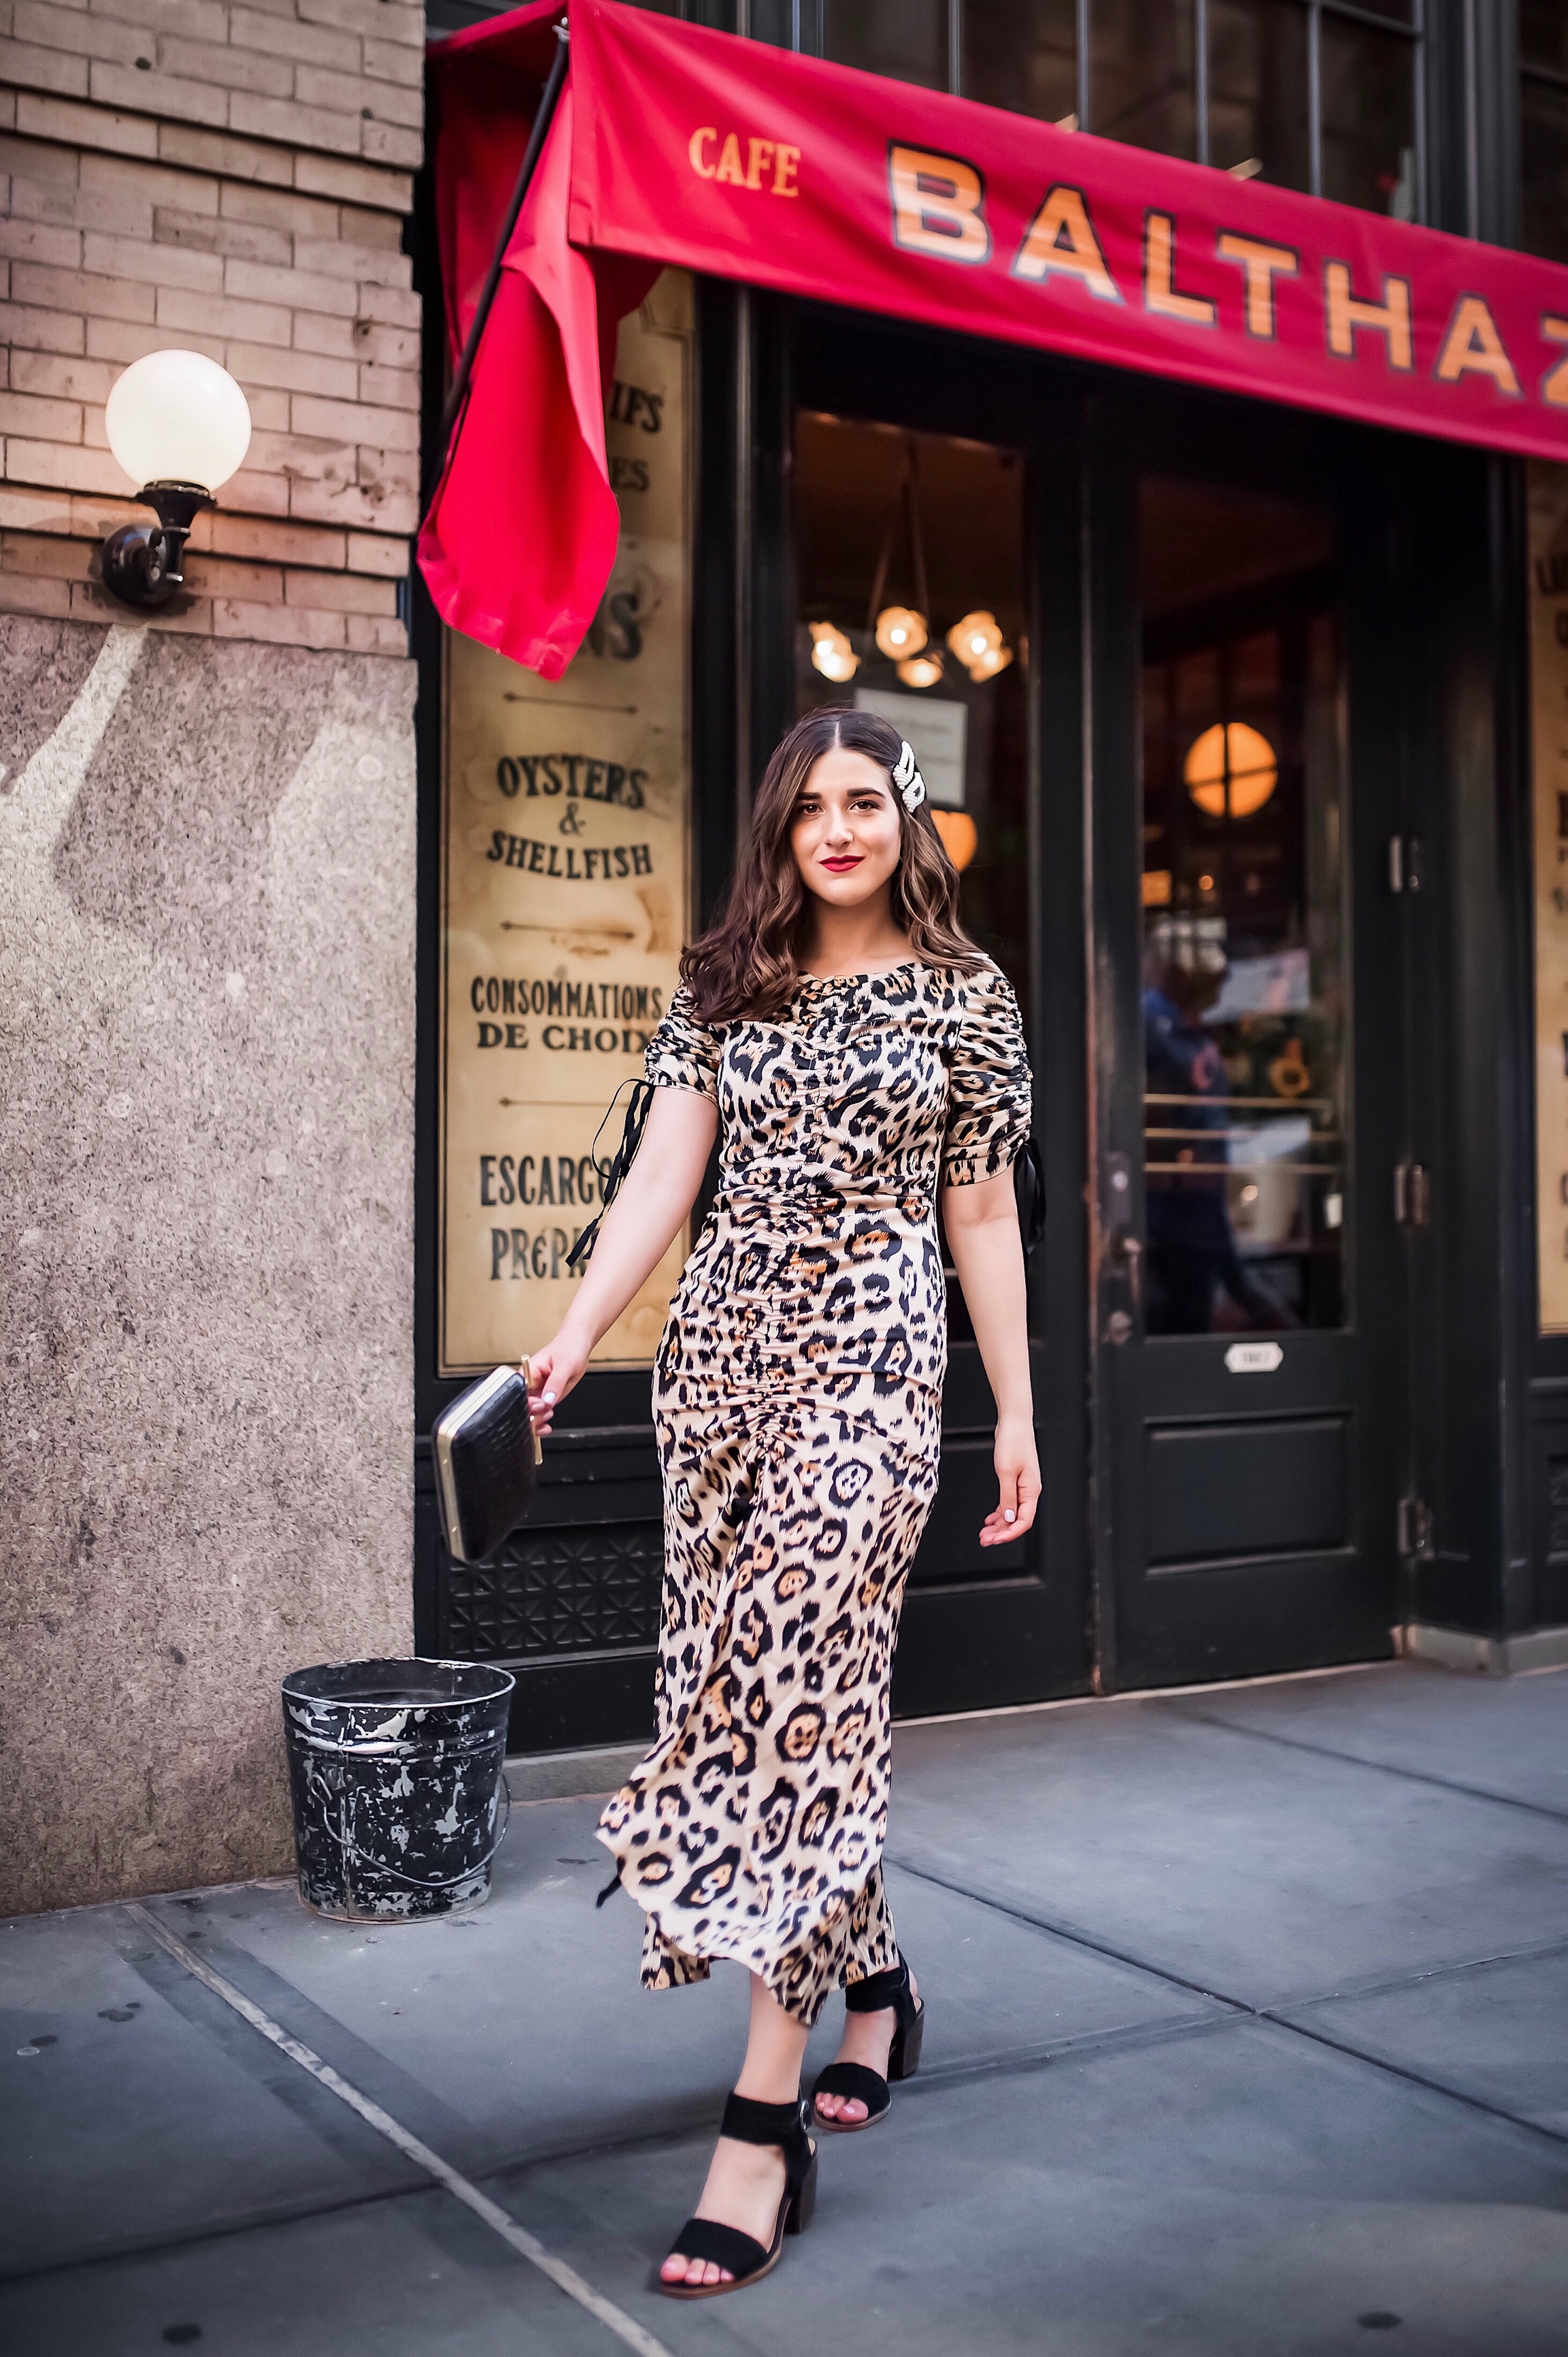 July 3 2019 Leopard Dress Pearl Hair Clips Esther Santer Fashion Blog NYC Street Style Blogger Outfit OOTD Trendy Shopping Girl What How To Wear Cheetah Black Braided Sandals Vince Camuto Balthazar Restaurant Bag New York City Soho Photoshoot Clothing.jpg